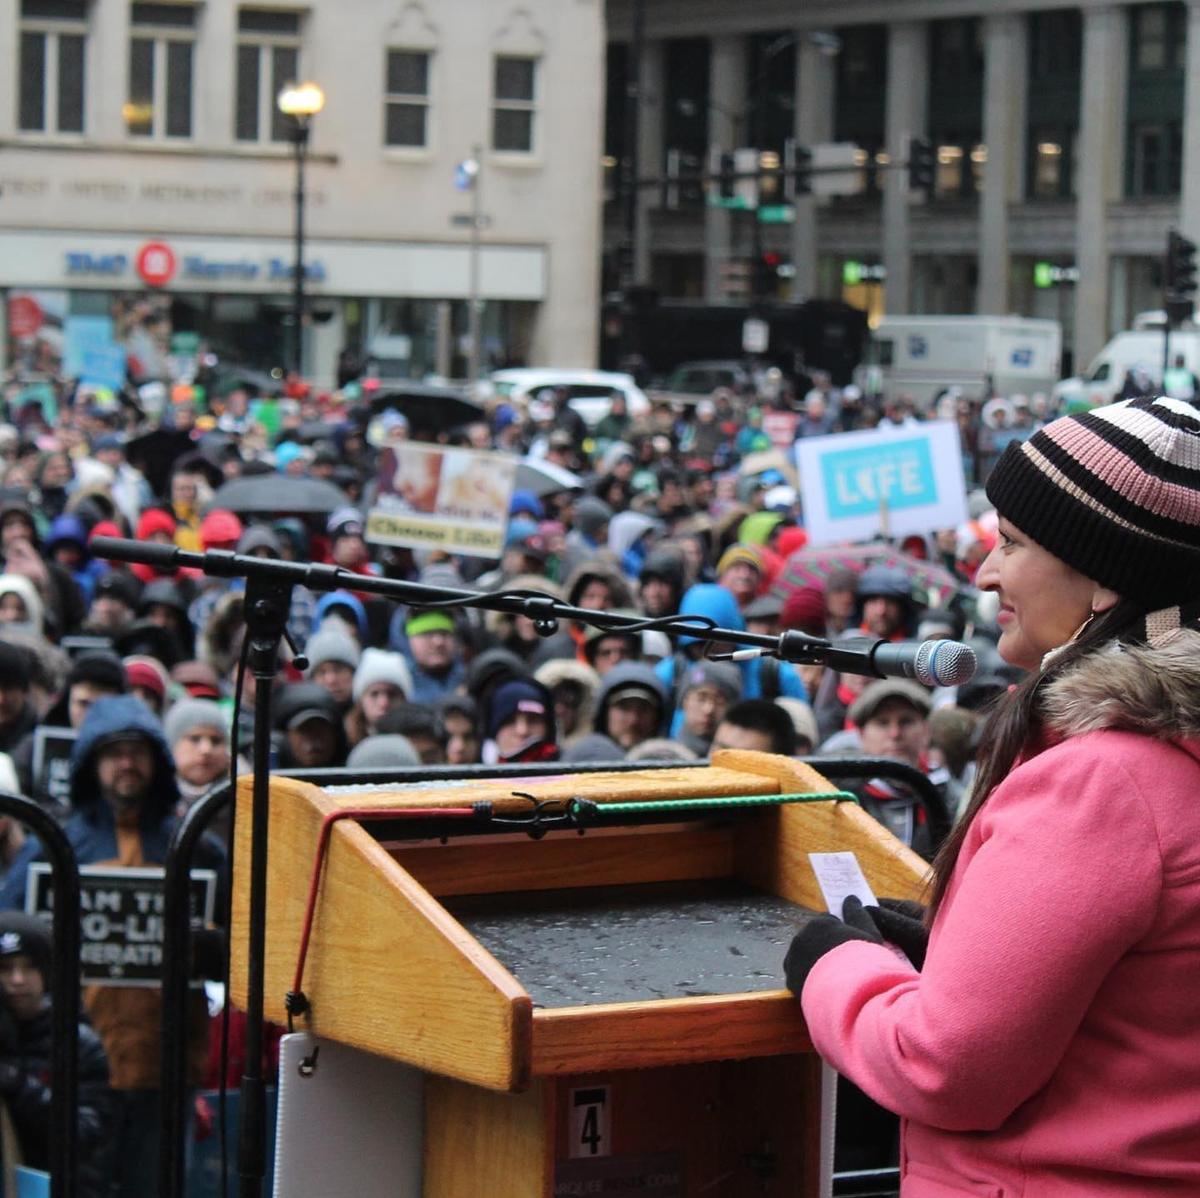 Claire speaking at a pro-life rally in January 2020 (Courtesy of <a href="https://www.facebook.com/ClaireCulwell">Claire Culwell</a>)